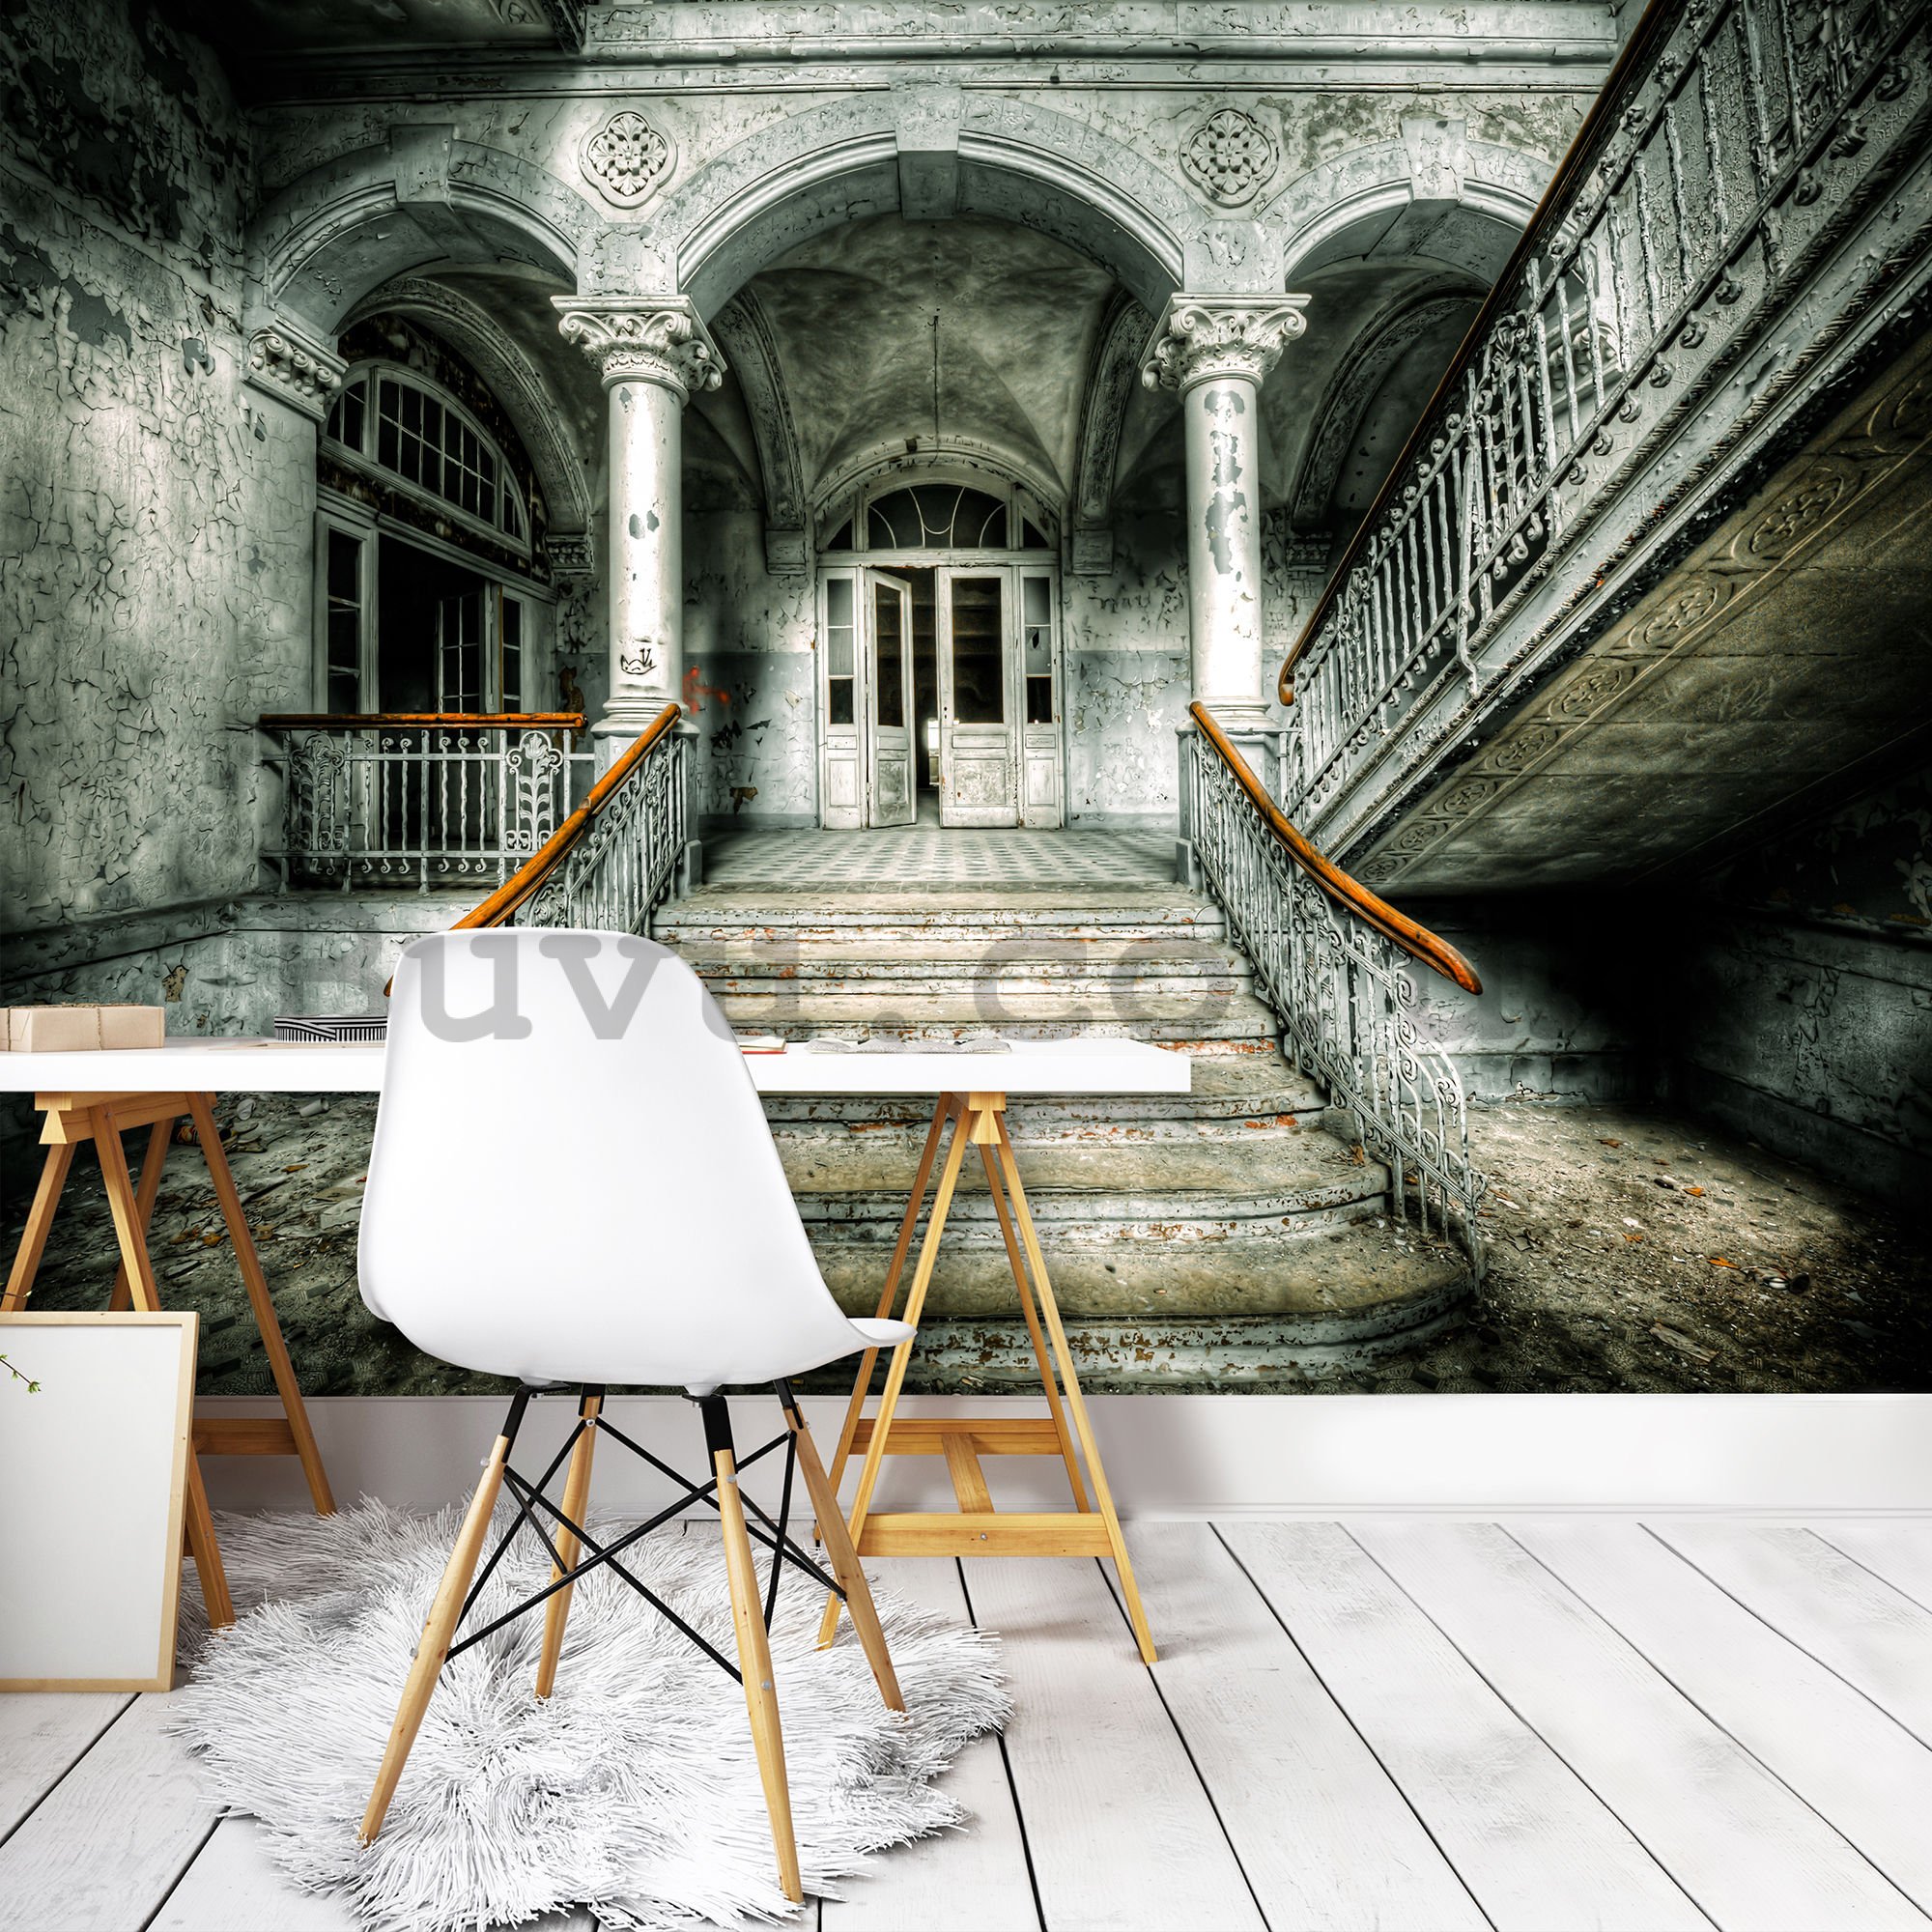 Wall mural: Stairs in front of the entrance - 254x368 cm